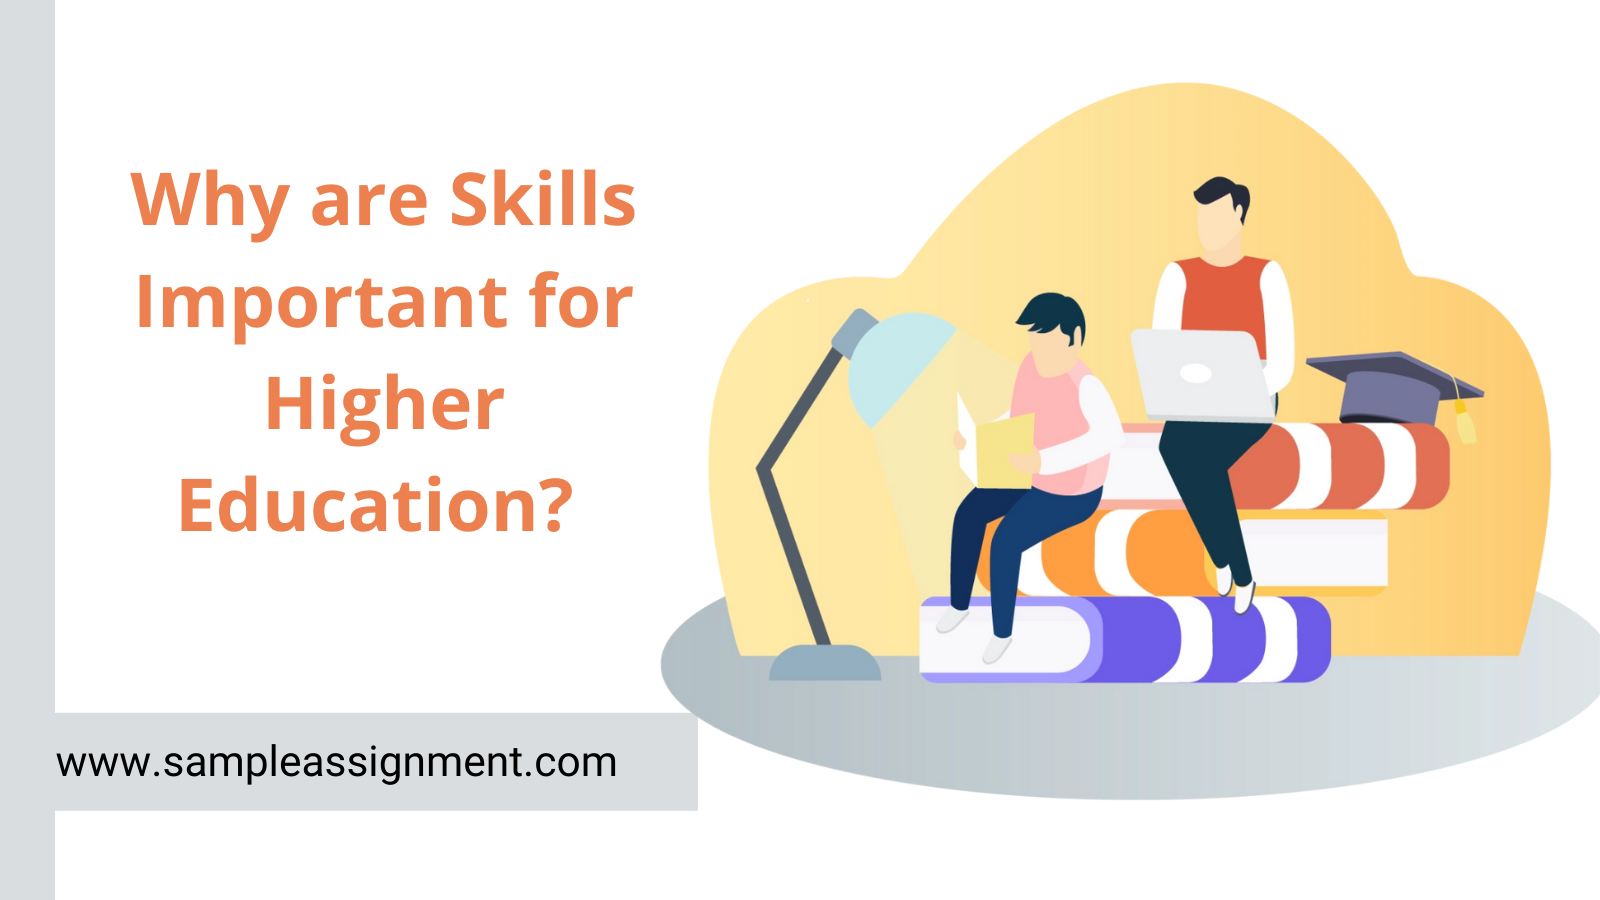 Why are the Skills Important for Higher Education